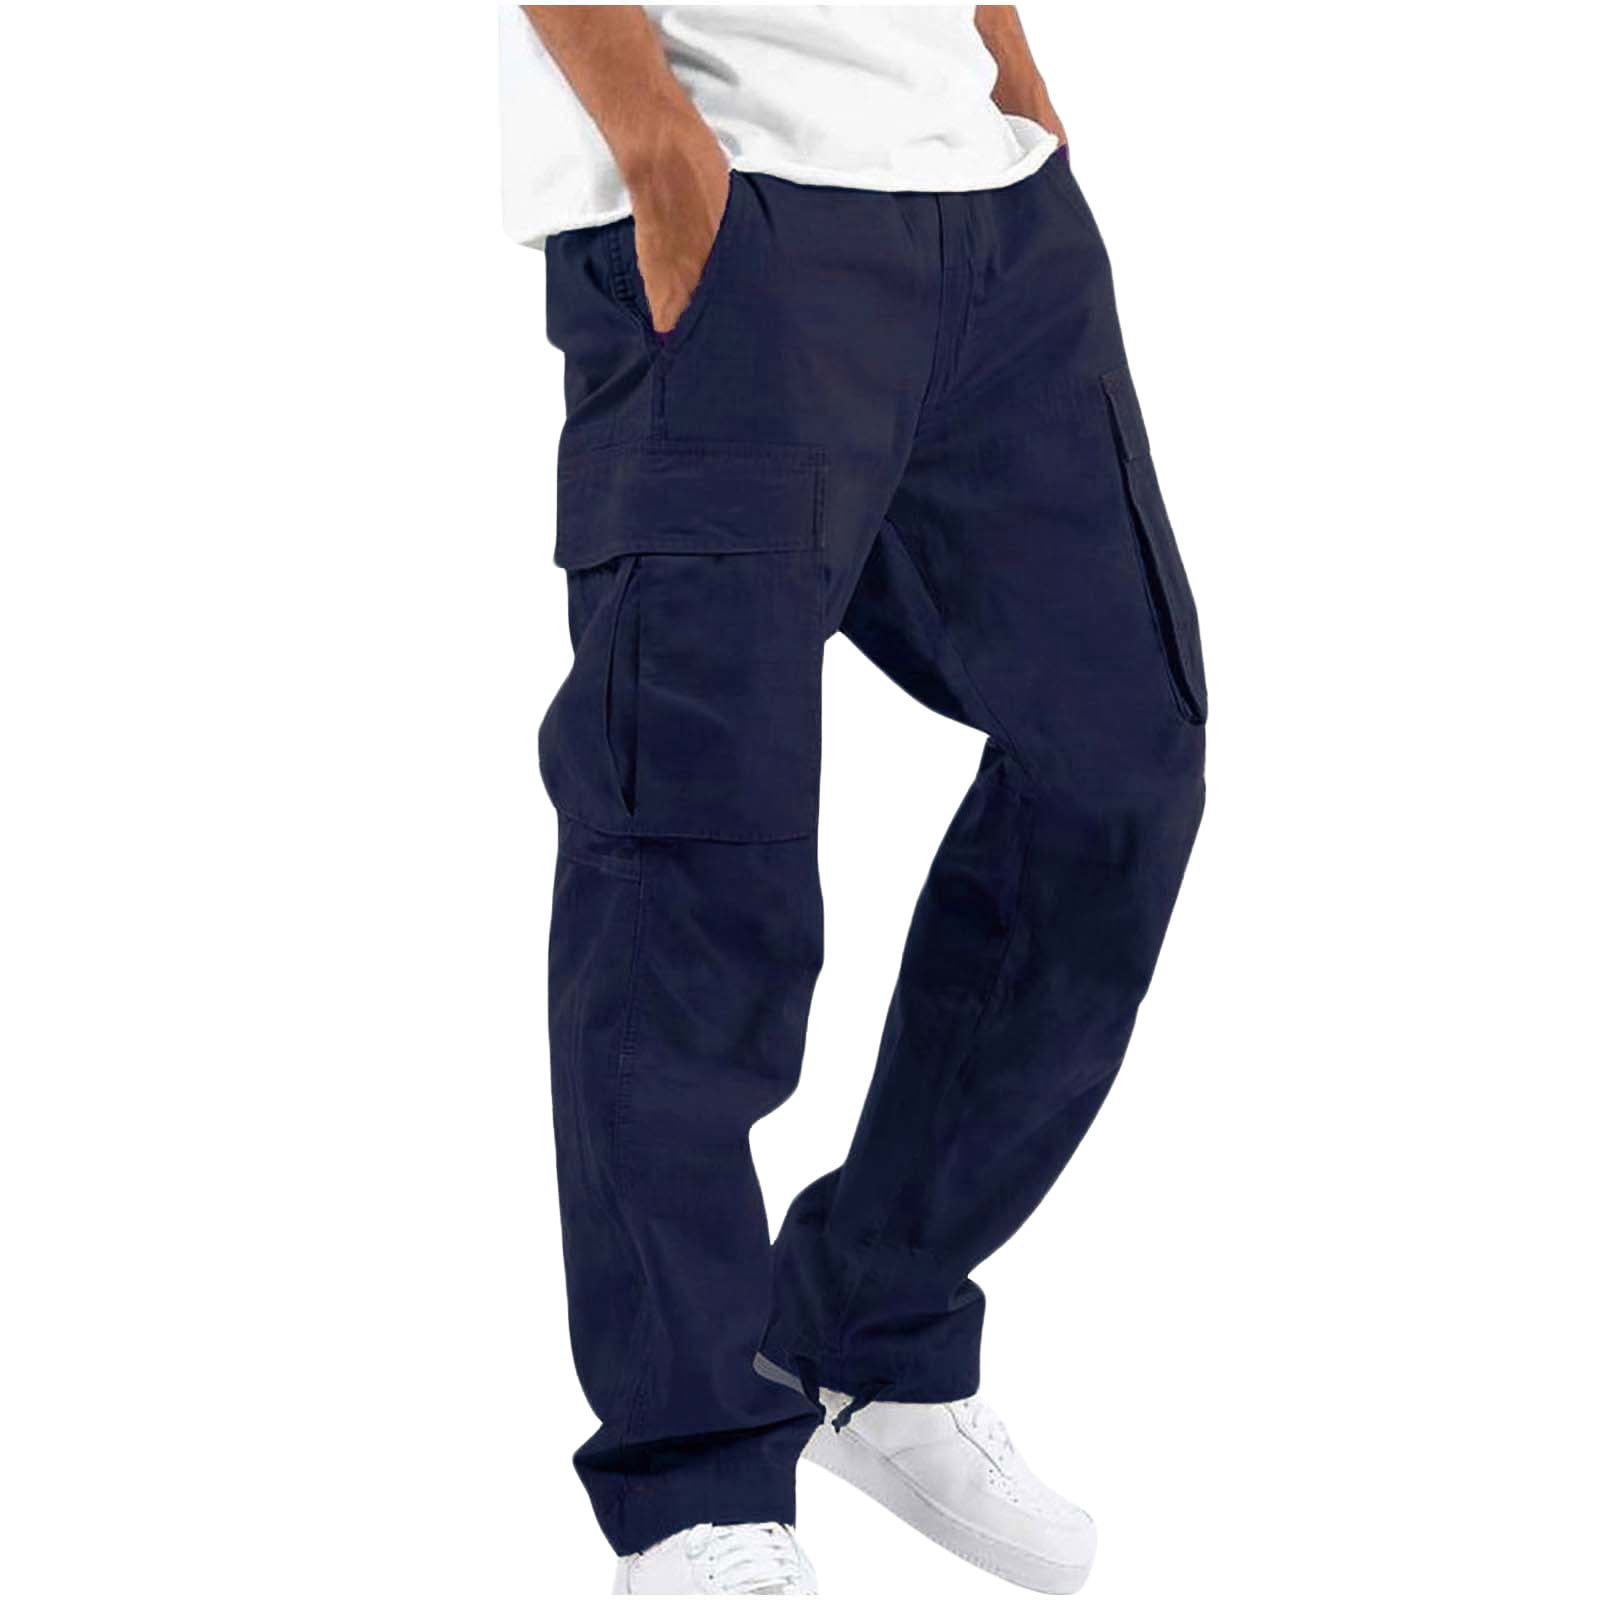 Buy Olive Trousers & Pants for Men by GAS Online | Ajio.com